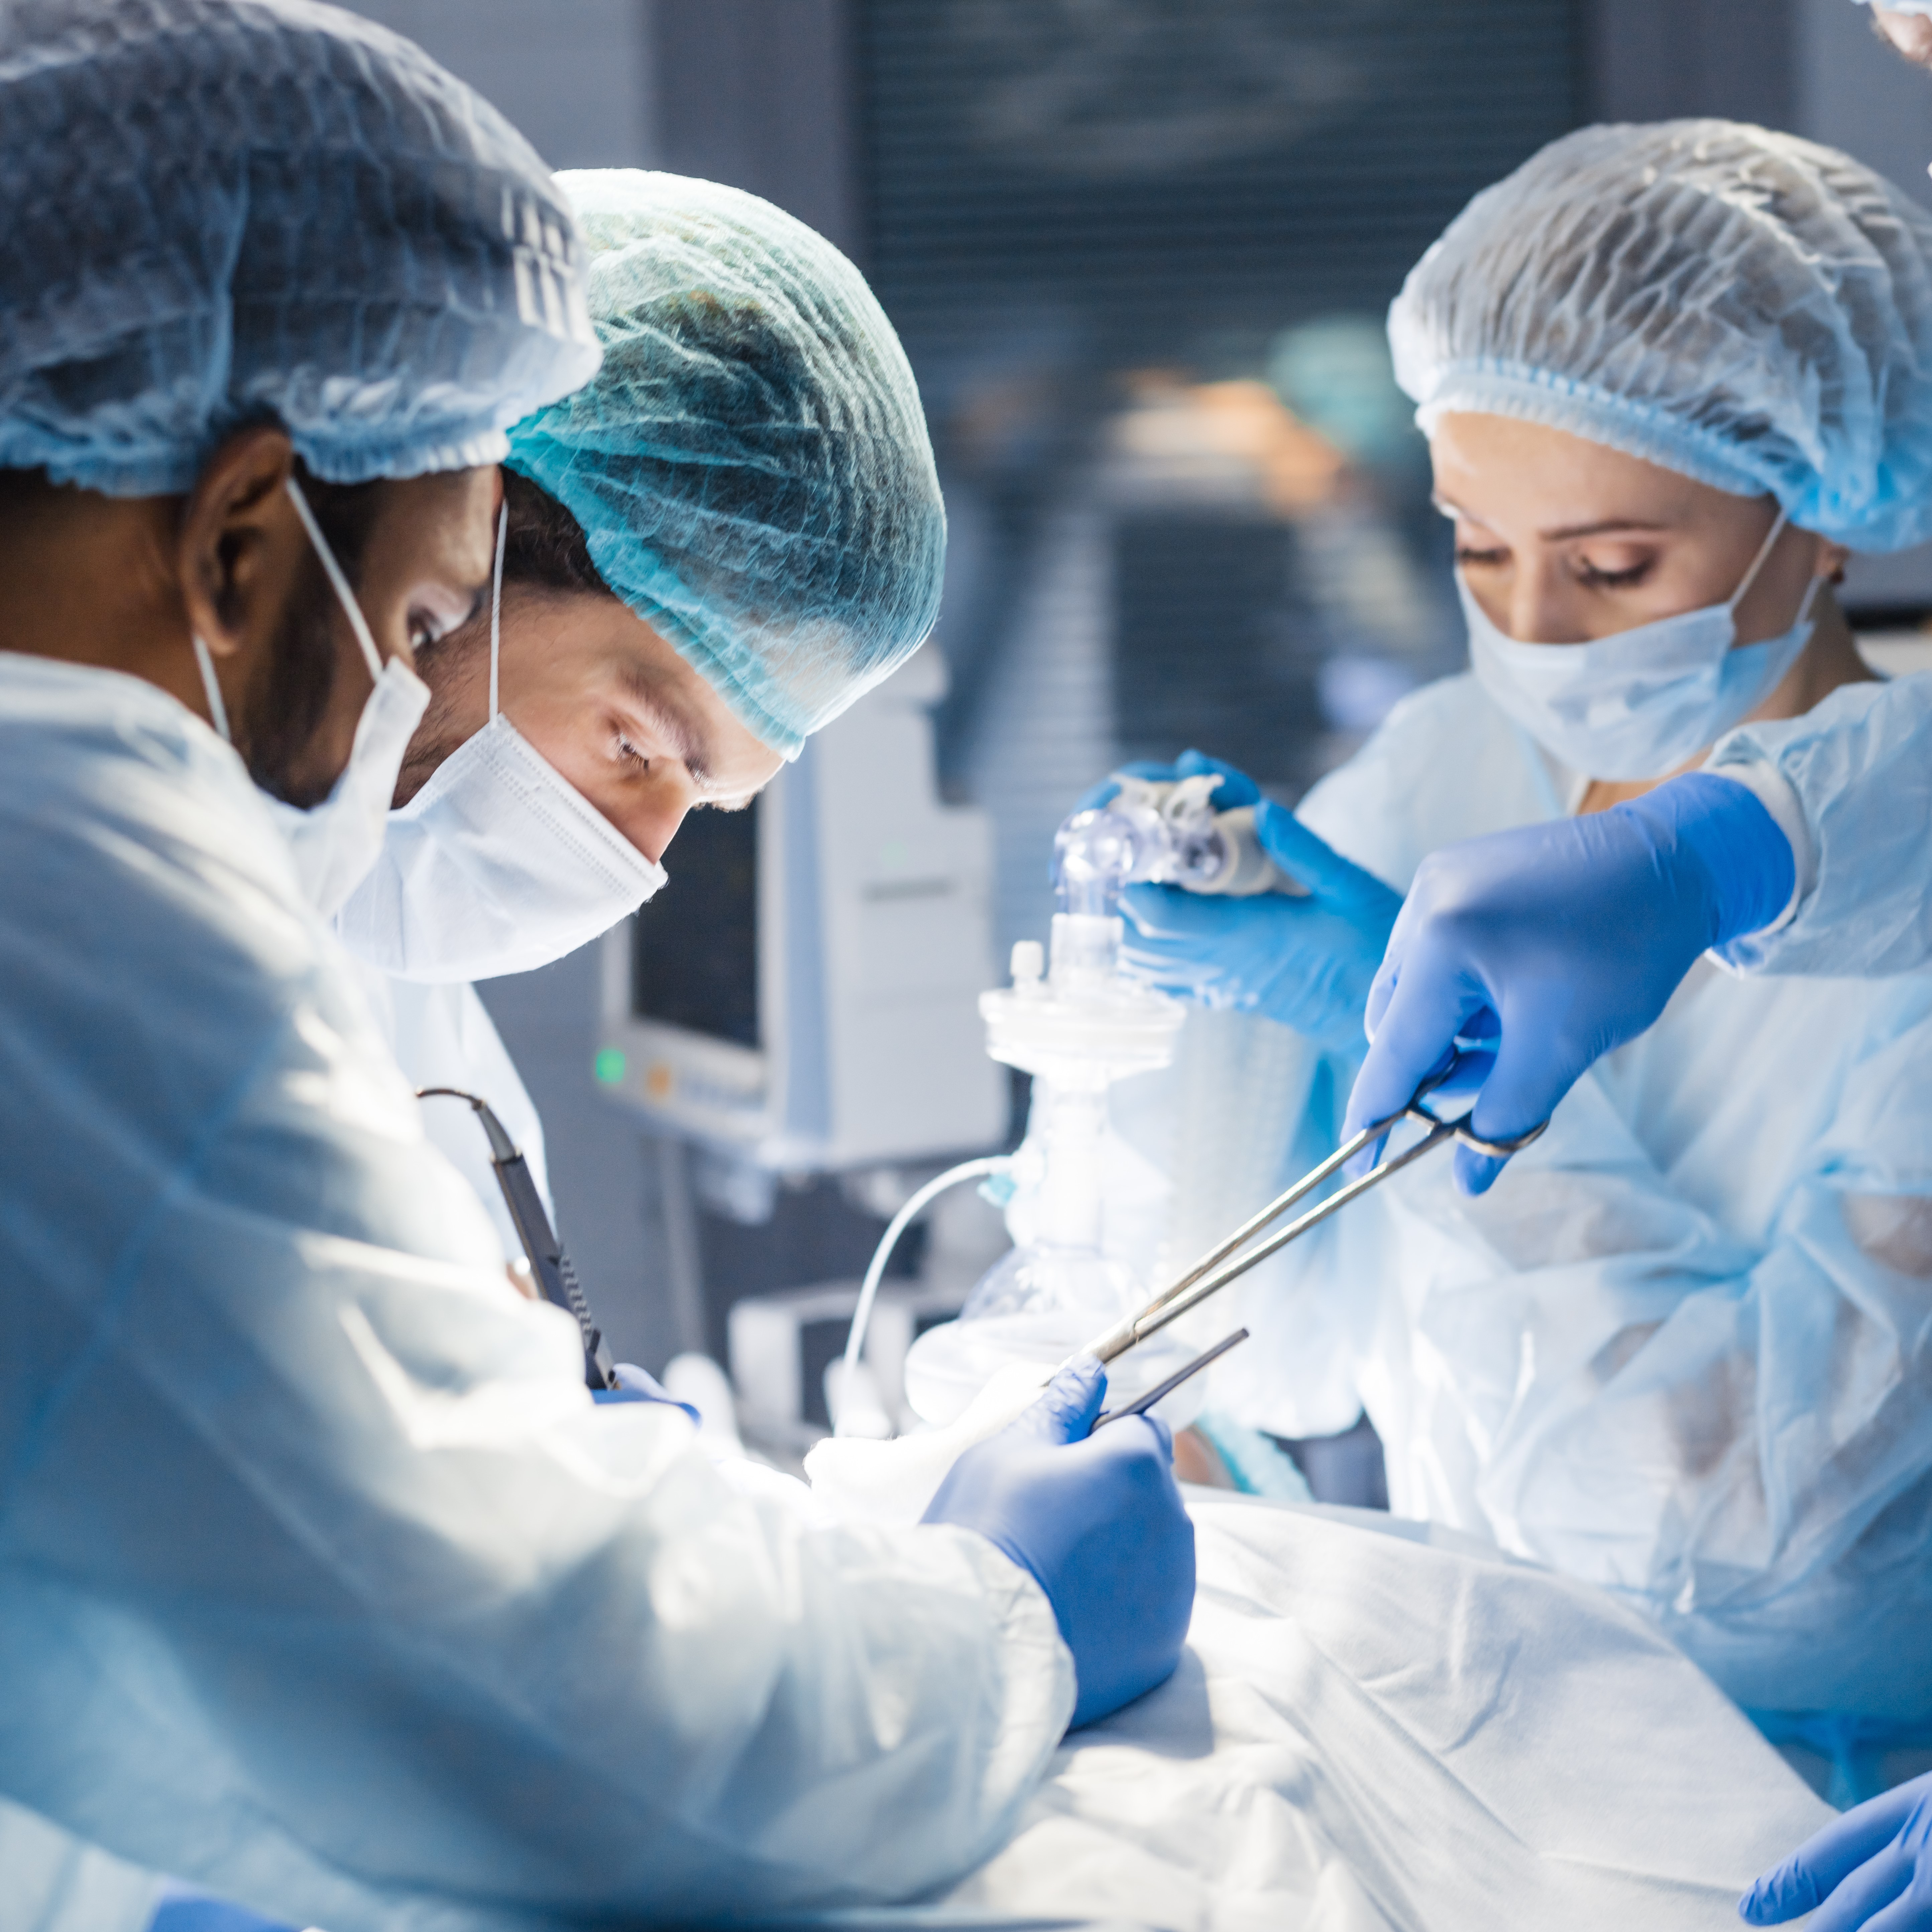 Four surgeons operate on a patient, putting their physician training to use as they perform a complex procedure.